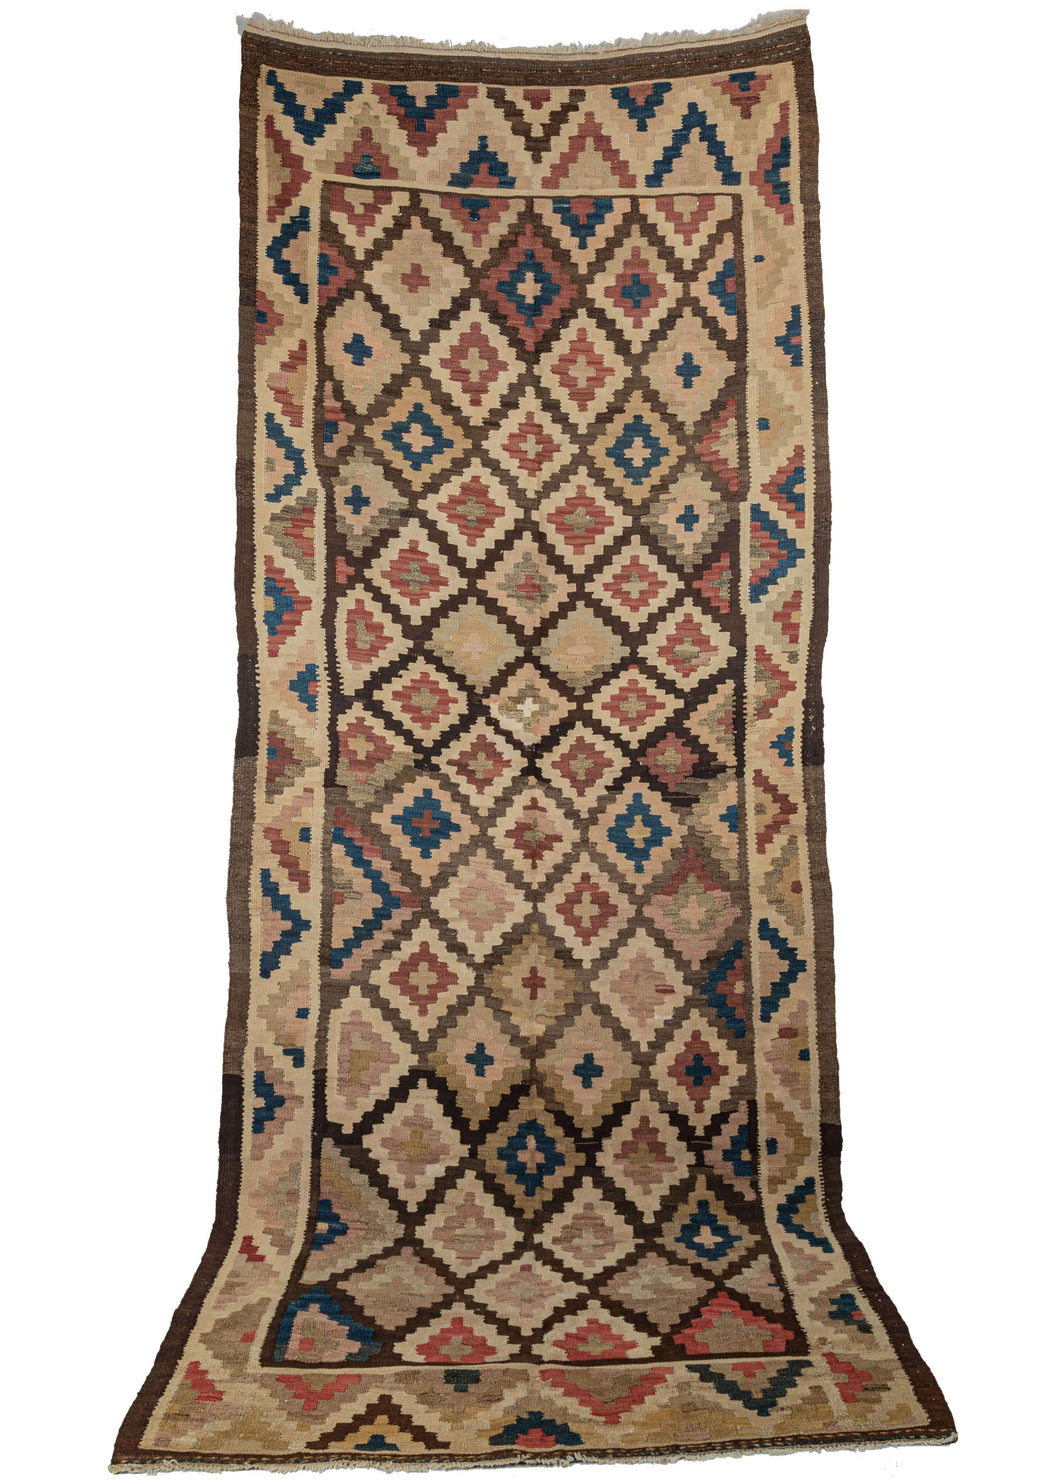 Kurdish Kelleghi kilim composed of a stepped-diamond pattern in light and dark browns, ivory, red, yellow and soft pink. The pattern has moments of distortion which add interest. The border is composed of in alternating diamonds in the same tones and create a zigzag.